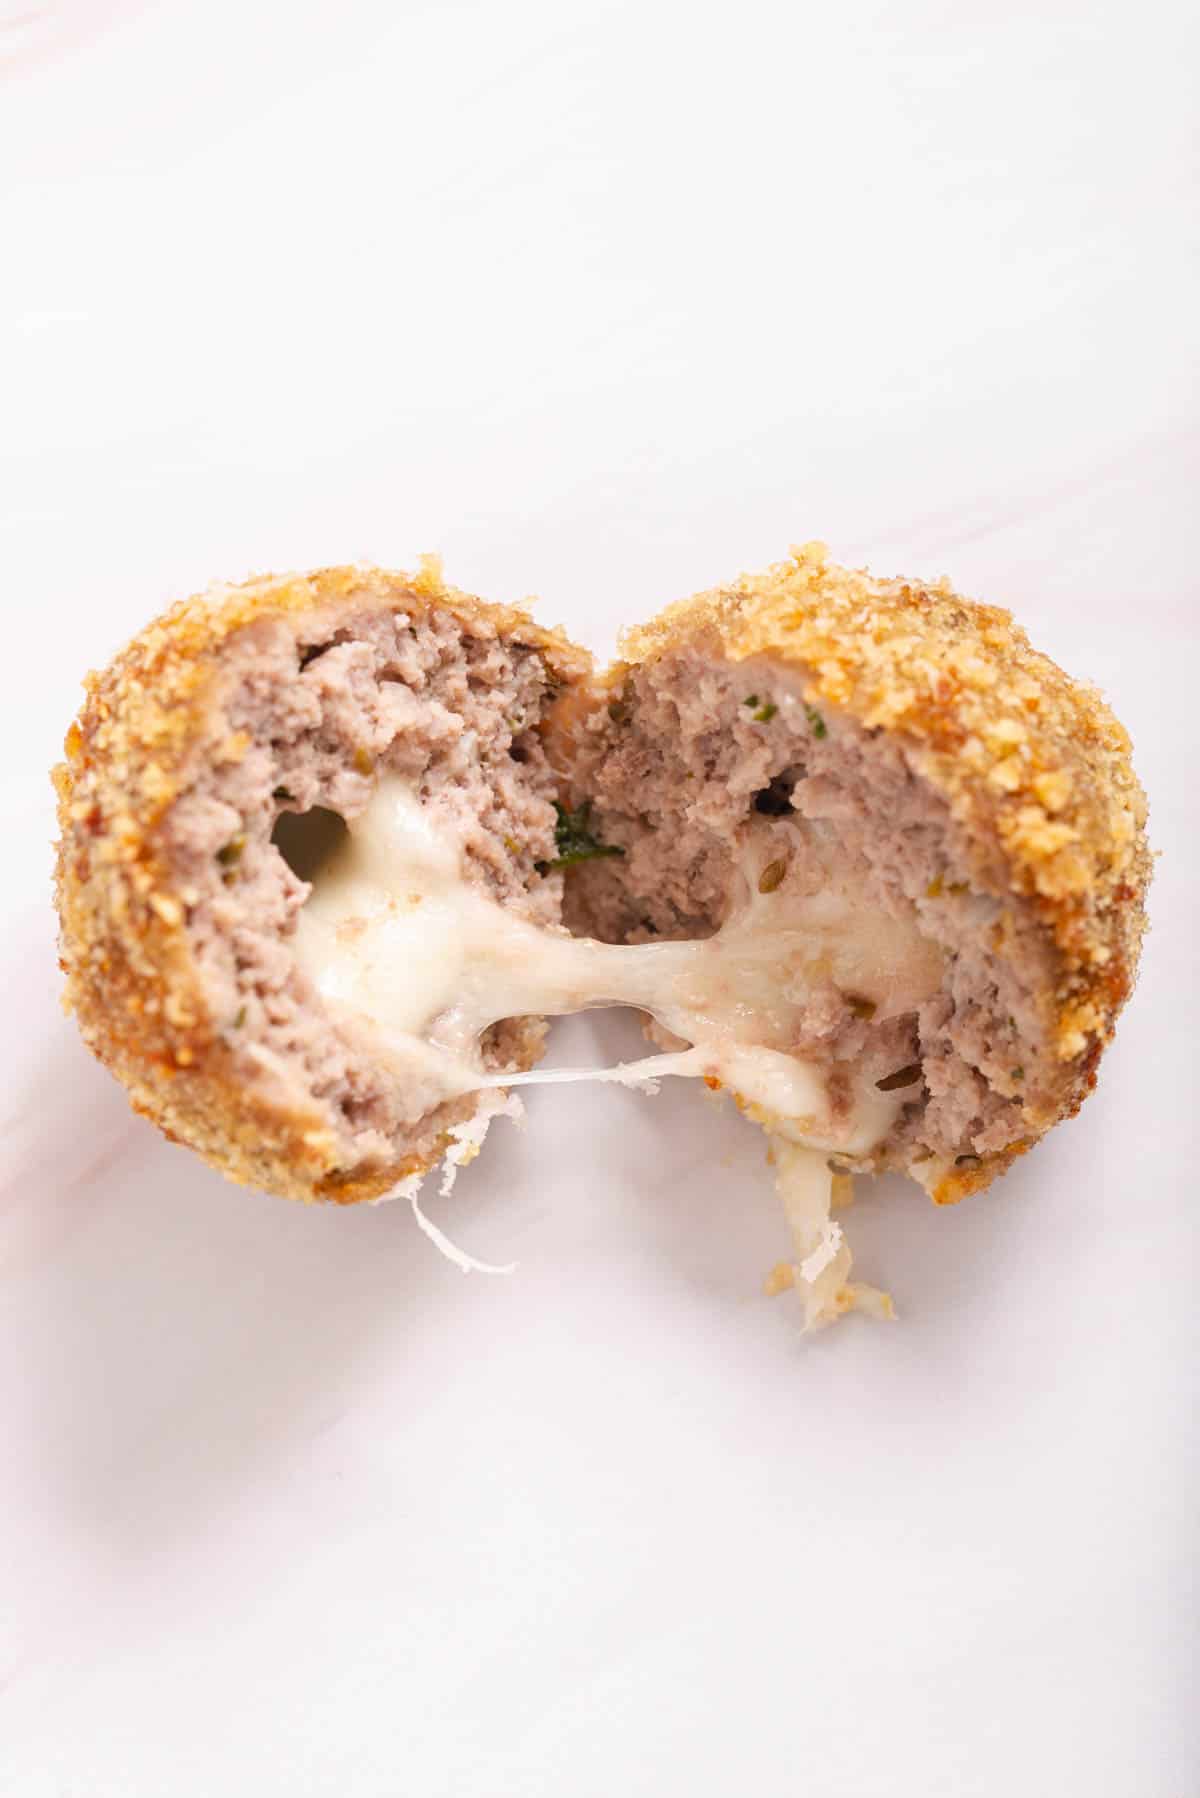 A cheese-stuffed meatball cut in half with cheese oozing out.